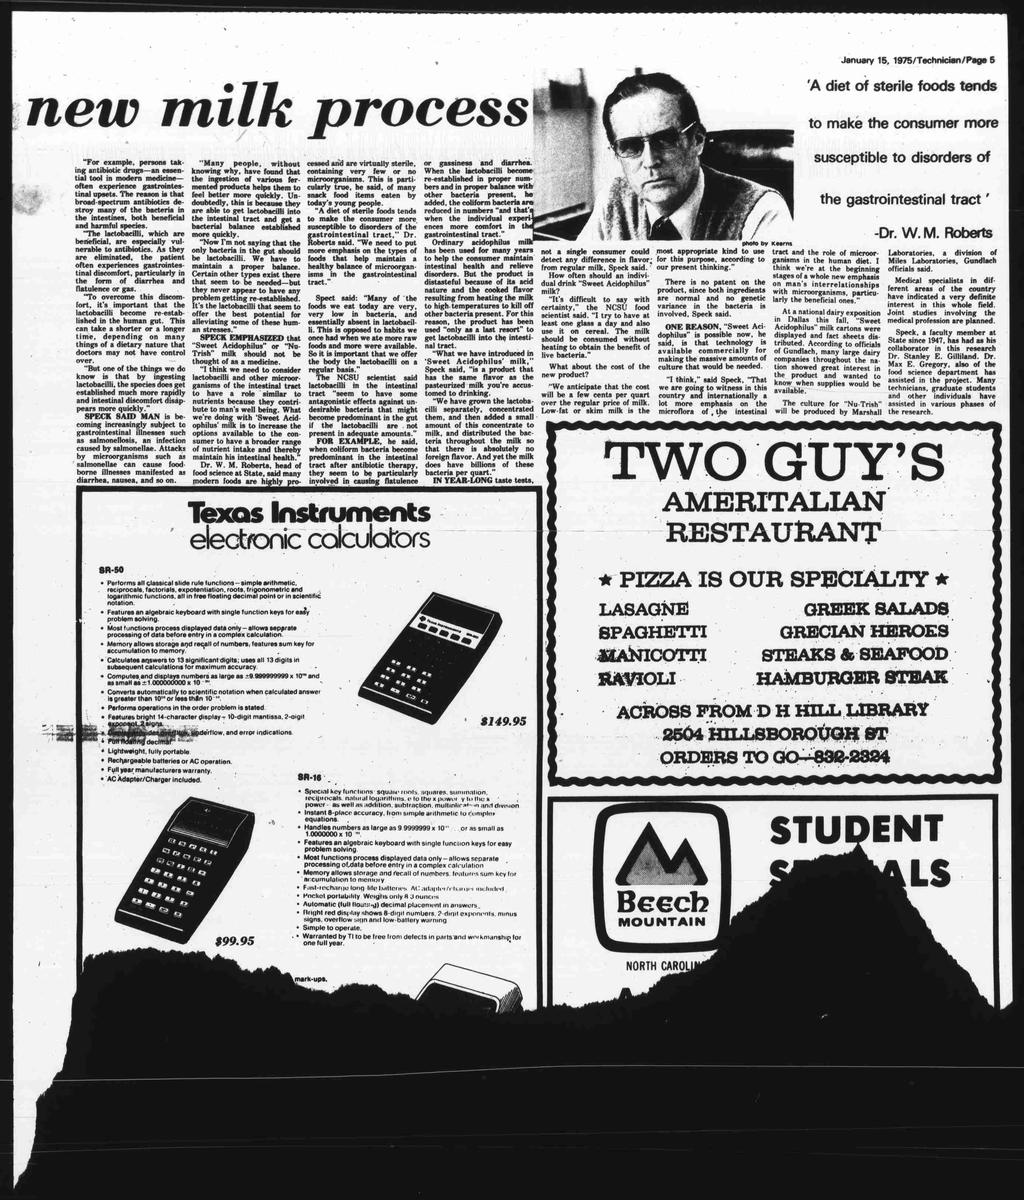 January 15 1975/Technician/Page 5 'A diet oi sterile foods tends new milk process to make consumer more For example persons taking antibiotic drugs an essen- klneowing why 2: found that containing